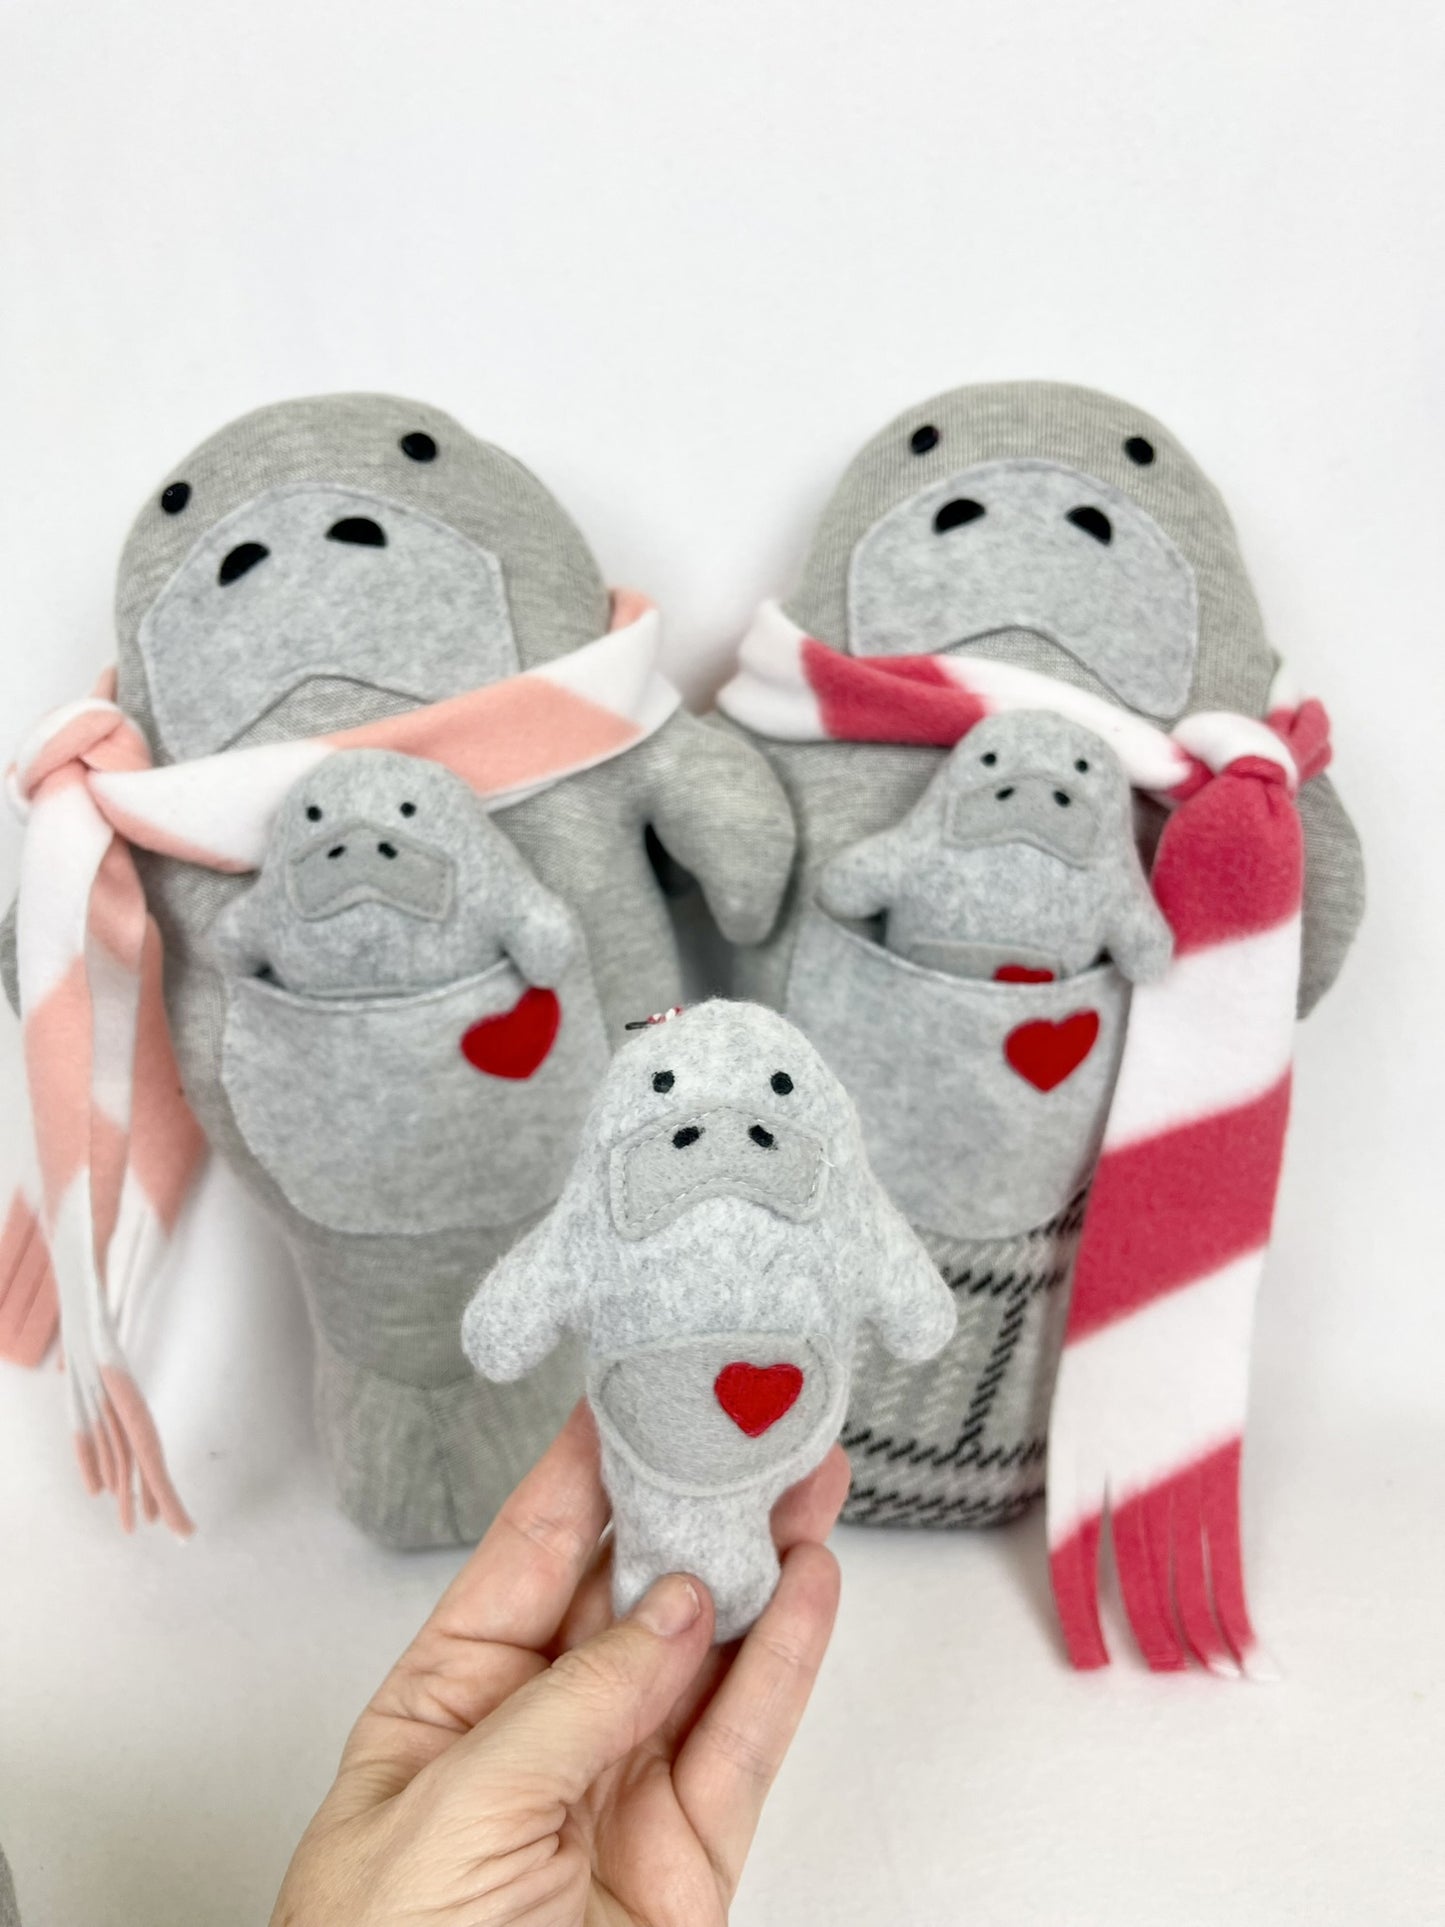 manatee stuffed animals with scarfs and babies in pockets